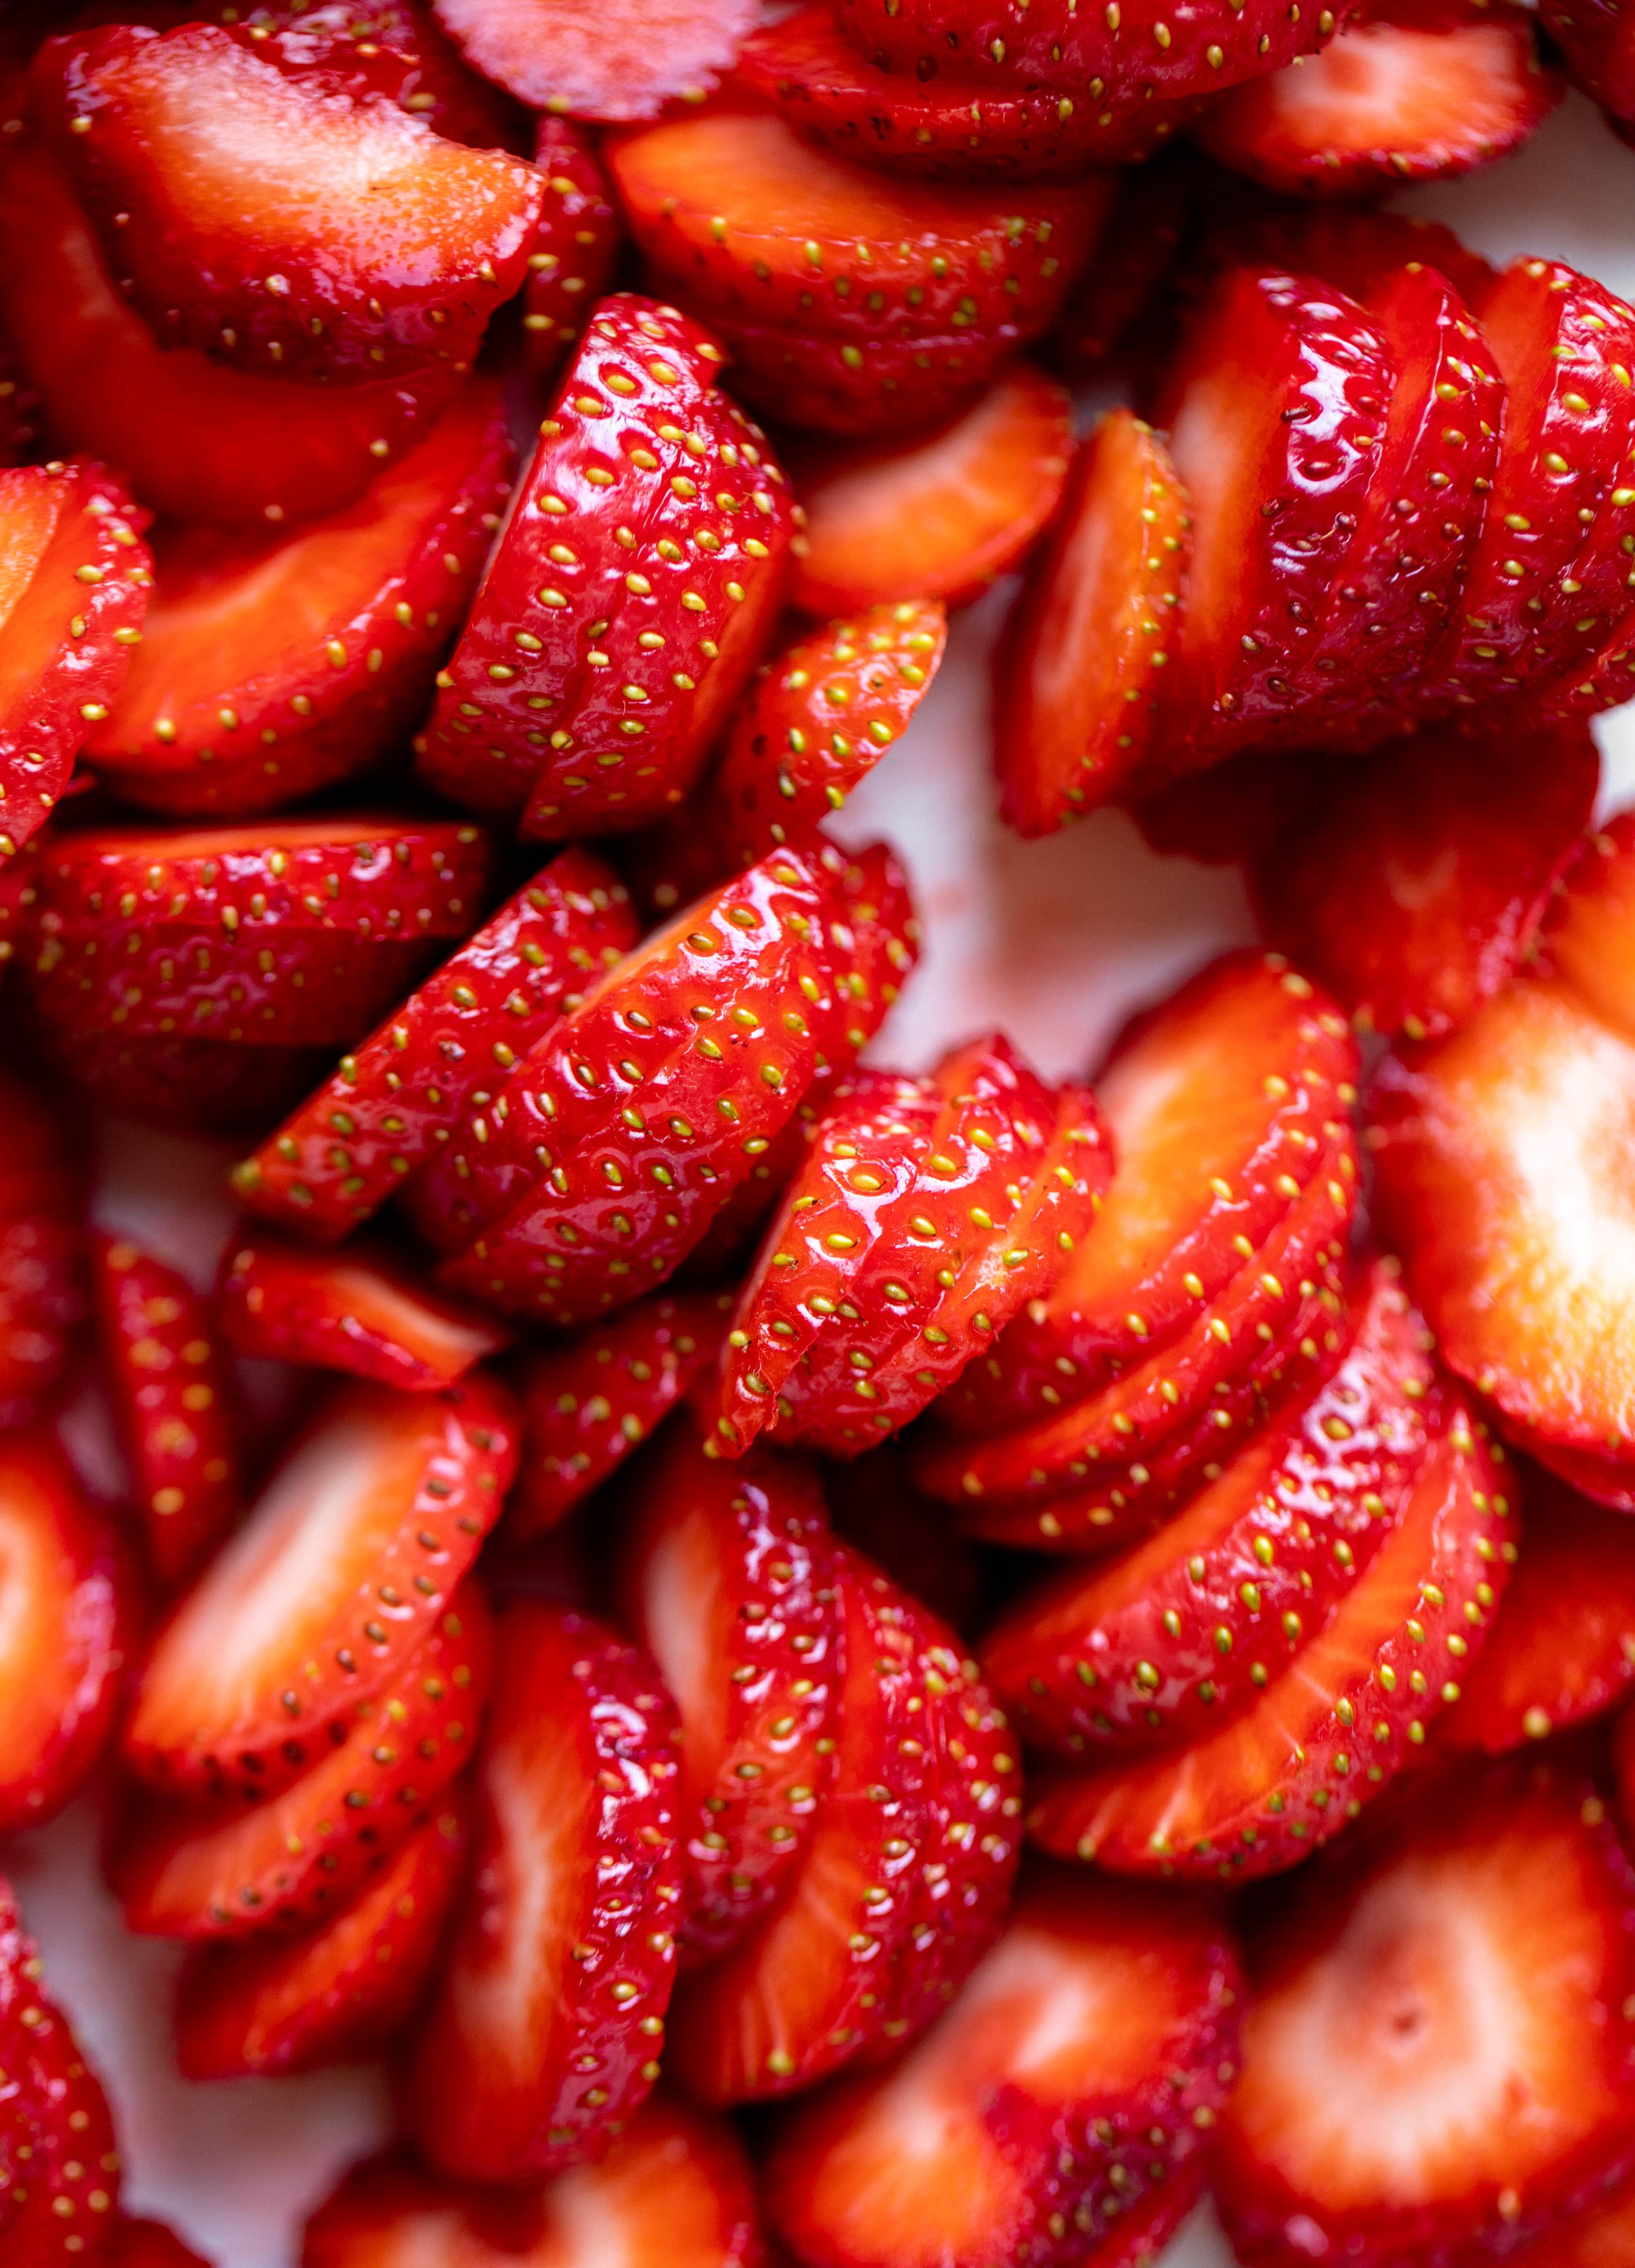 sliced strawberries close up